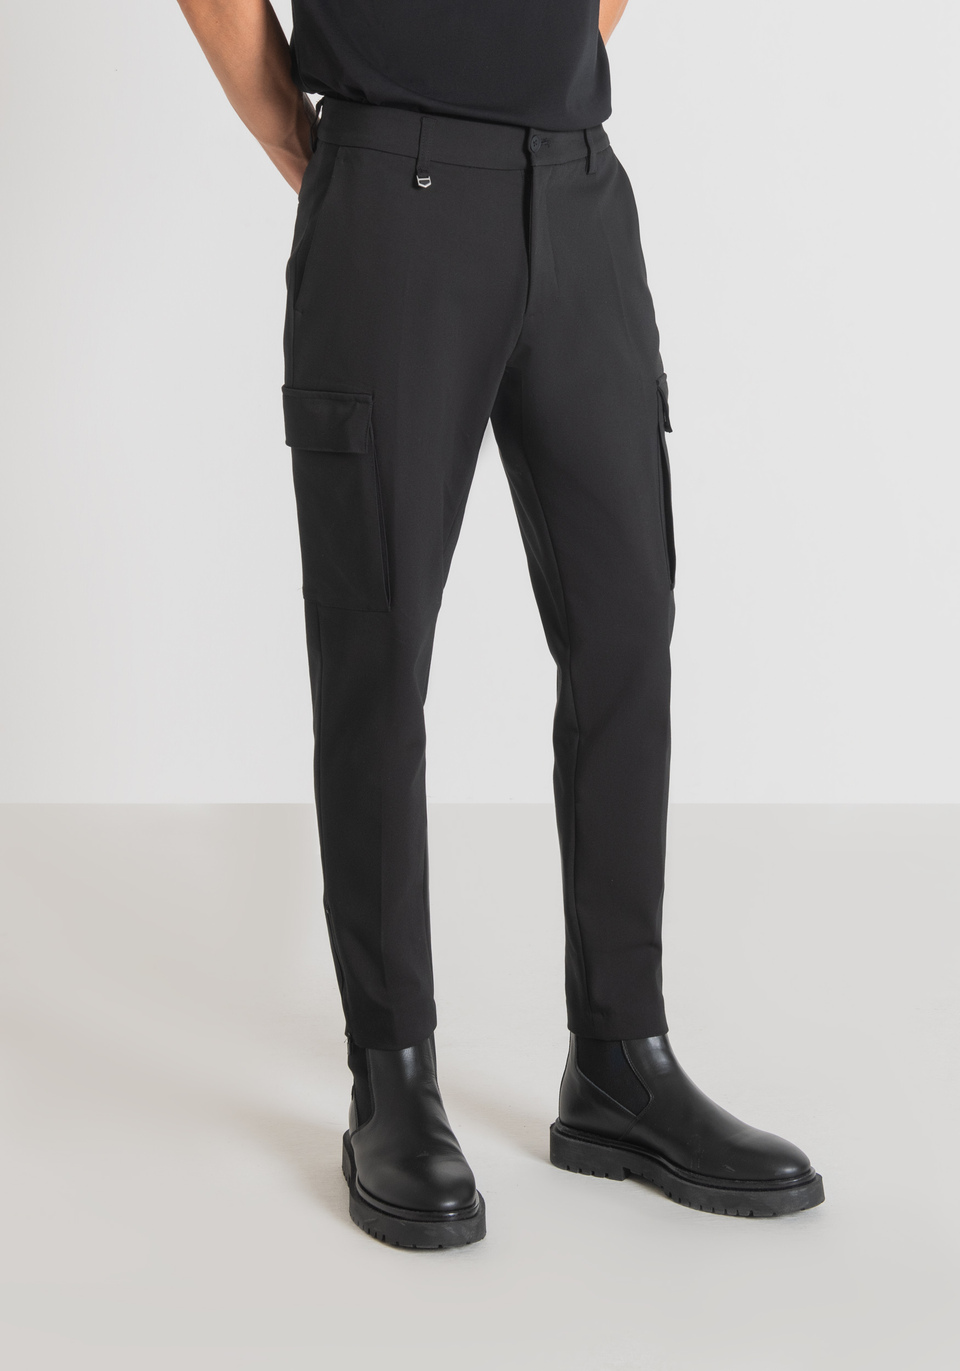 "BJORN" SKINNY FIT TROUSERS IN STRETCH COTTON BLEND WITH ZIP ON THE BOTTOM - Antony Morato Online Shop